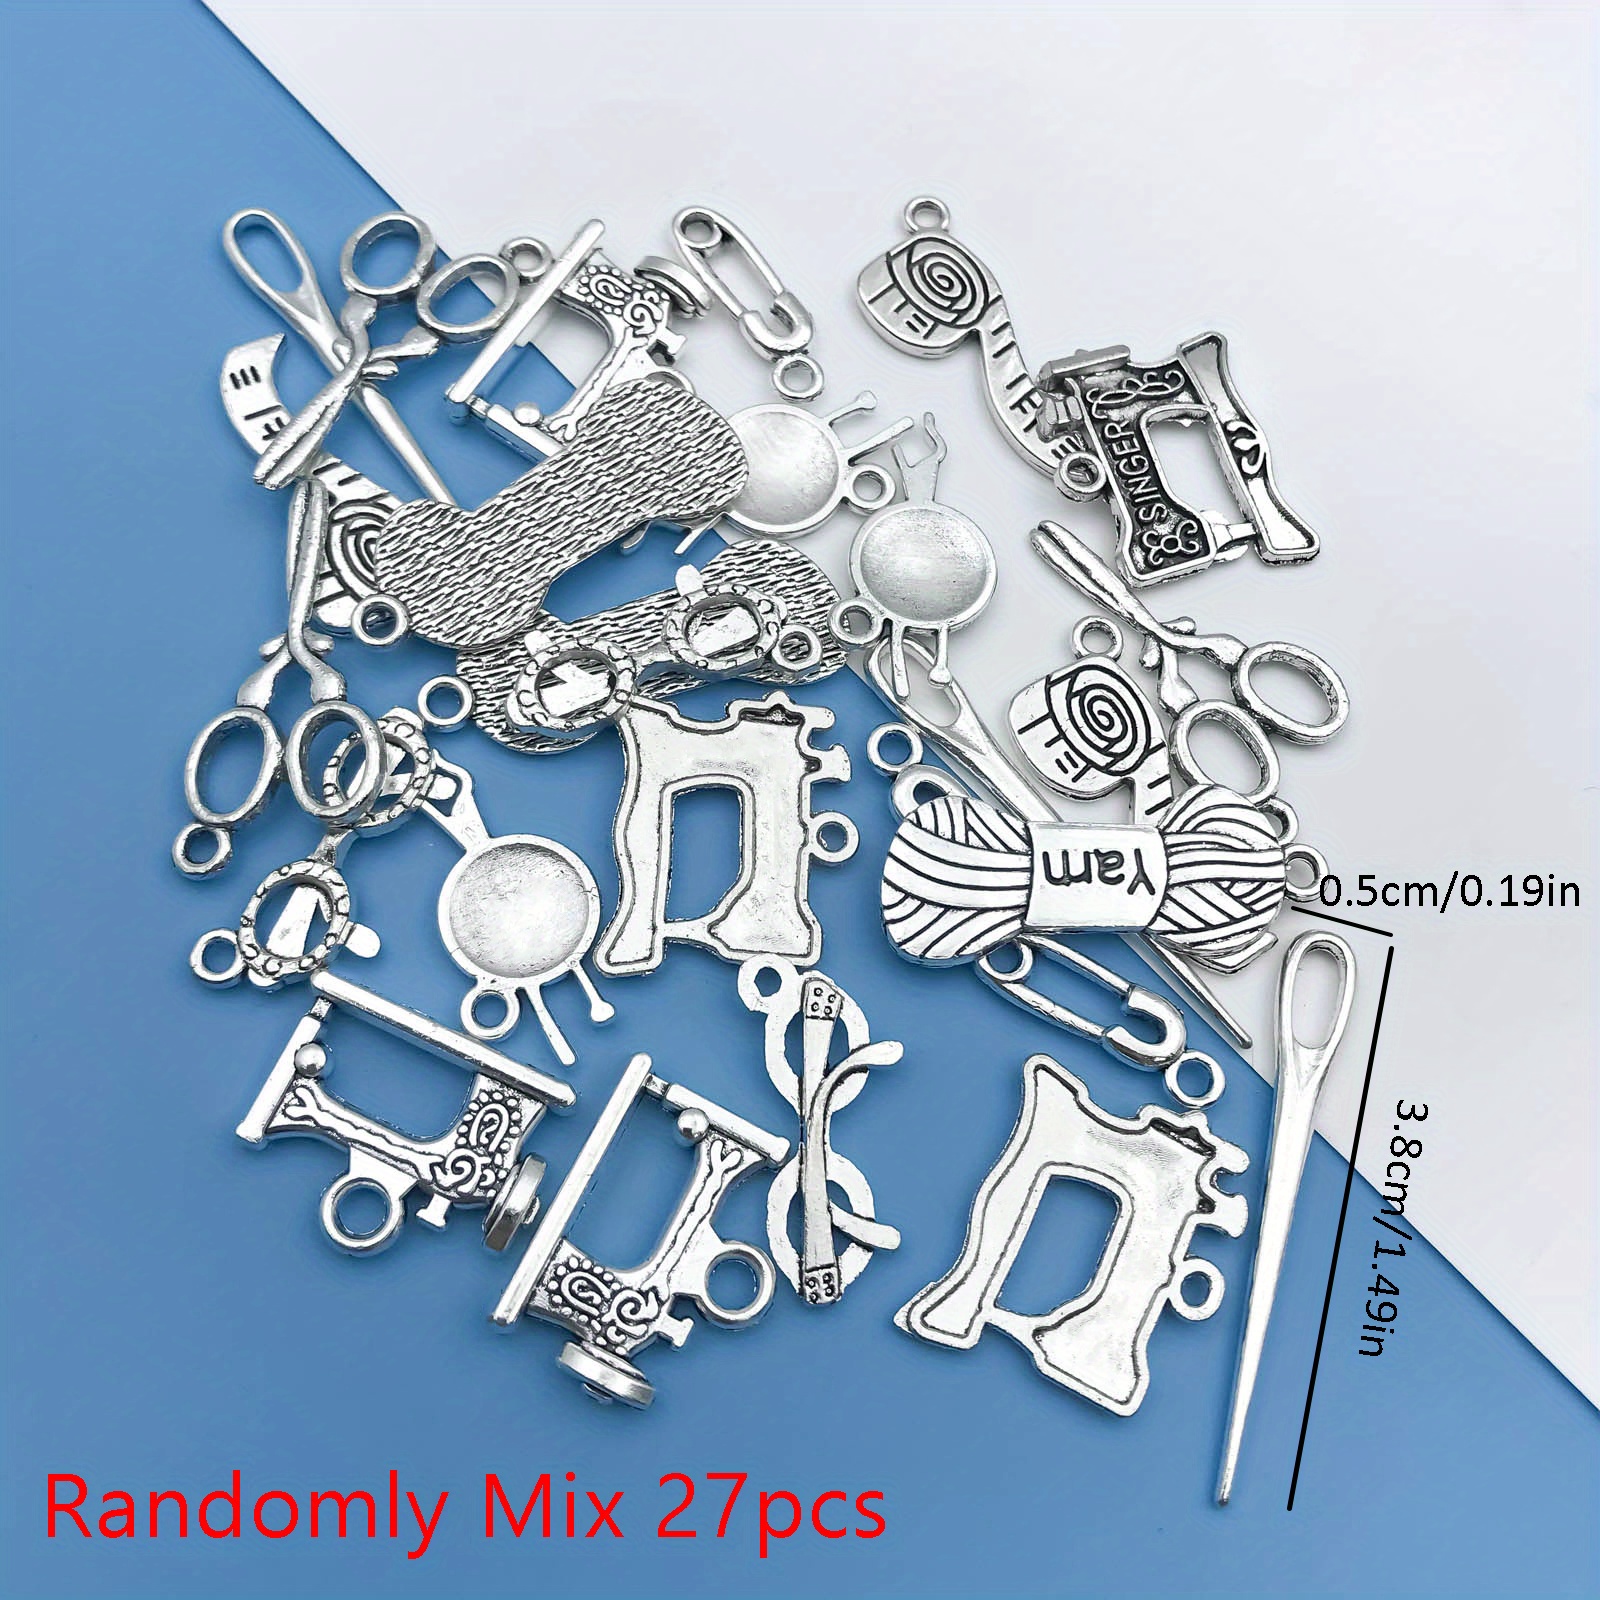 Wholesale Bulk Lots Jewelry Making Mixed Smooth Tibetan Silver Metal Charms  Pendants Diy For Necklace Bracelet 100 Pcs 7-25mm - Charms - AliExpress